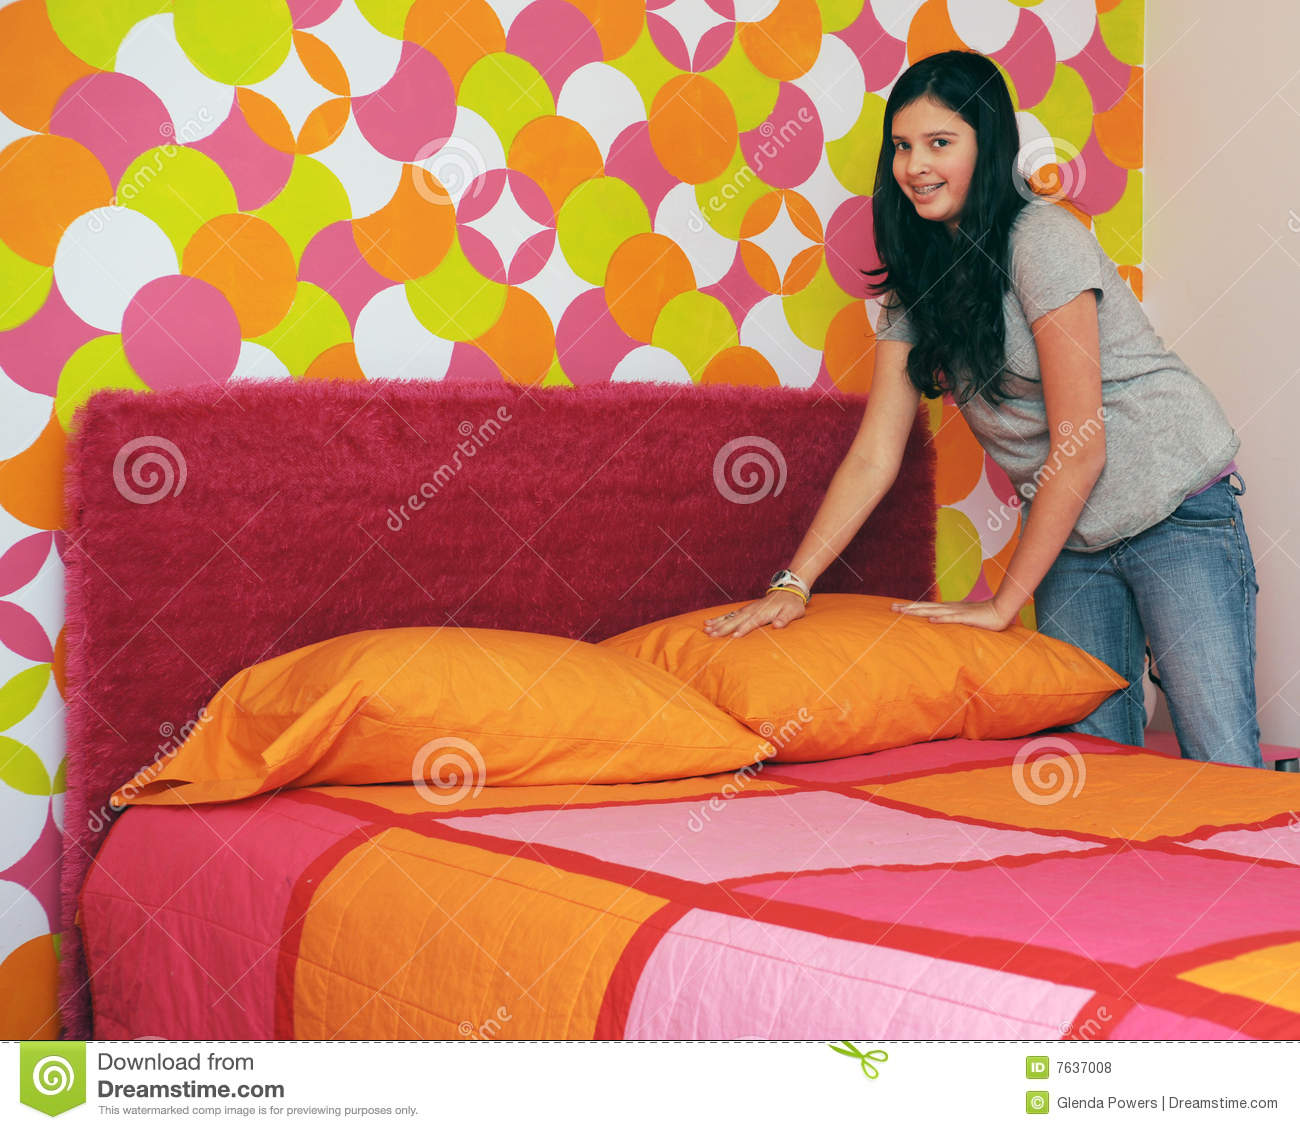 Preteen Girl Happily Making Her Bed In Her Very Colorful Room